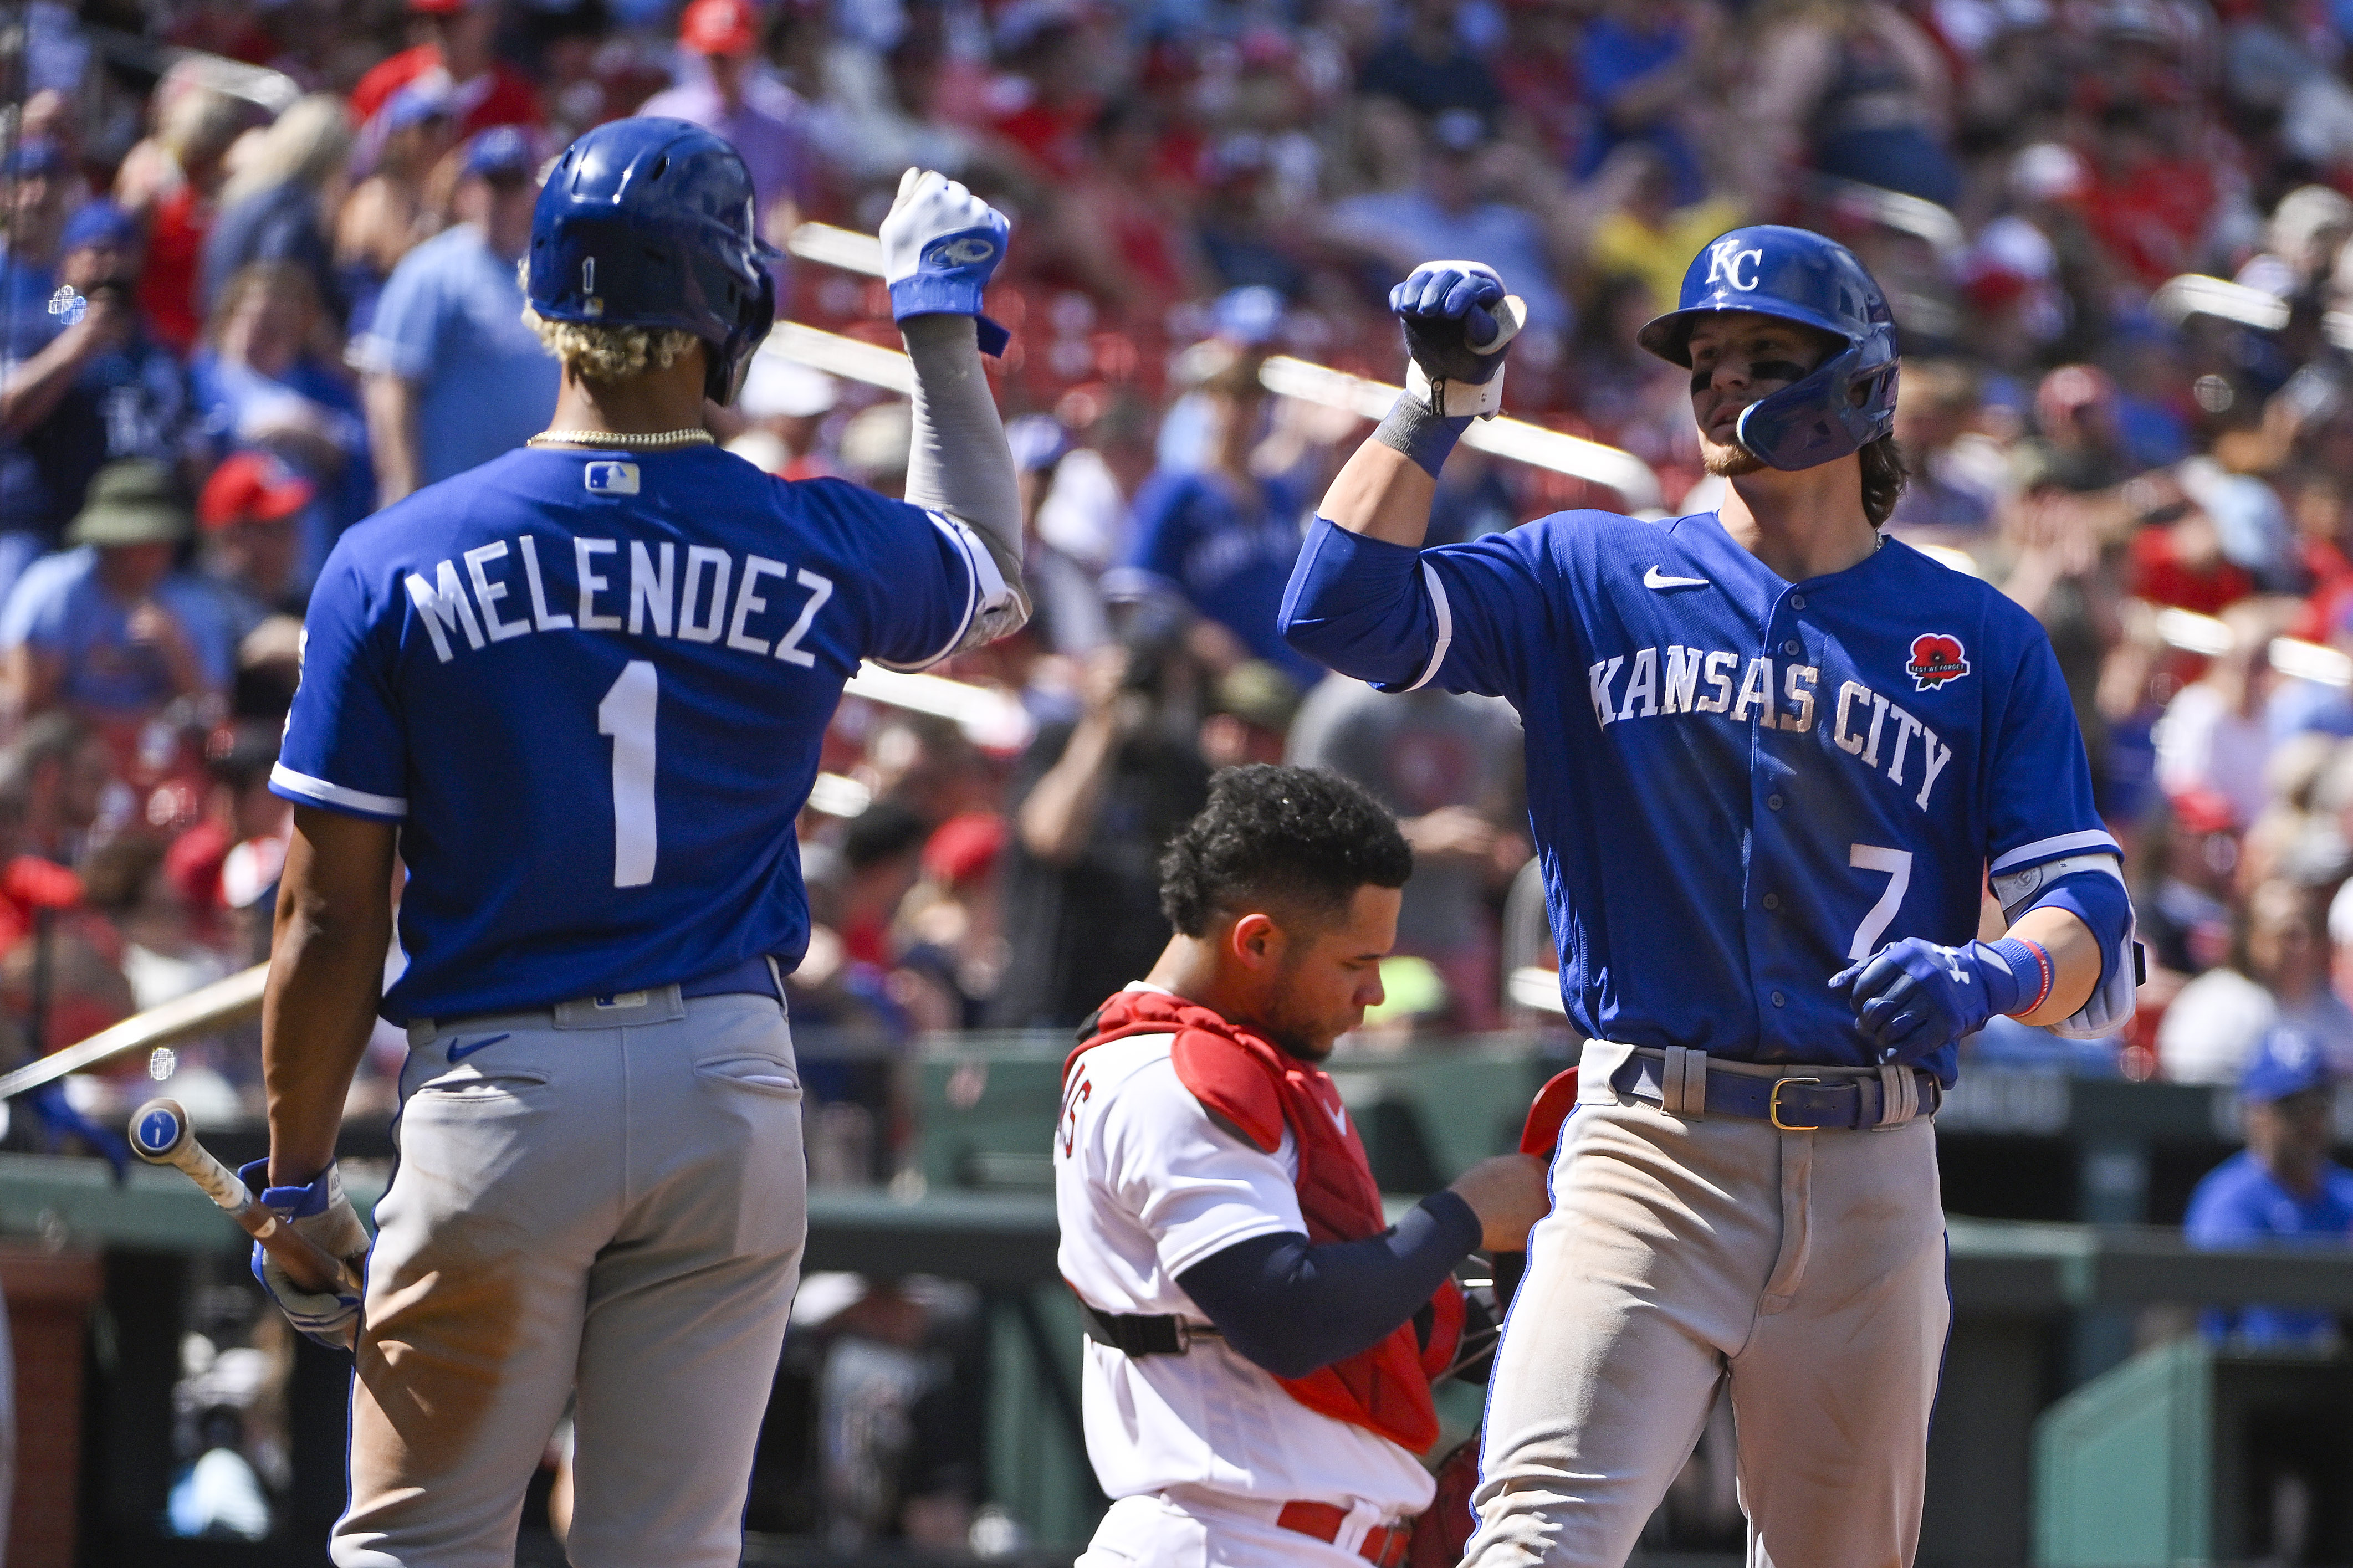 Four Royals pitchers combine on two-hit shutout of Cardinals